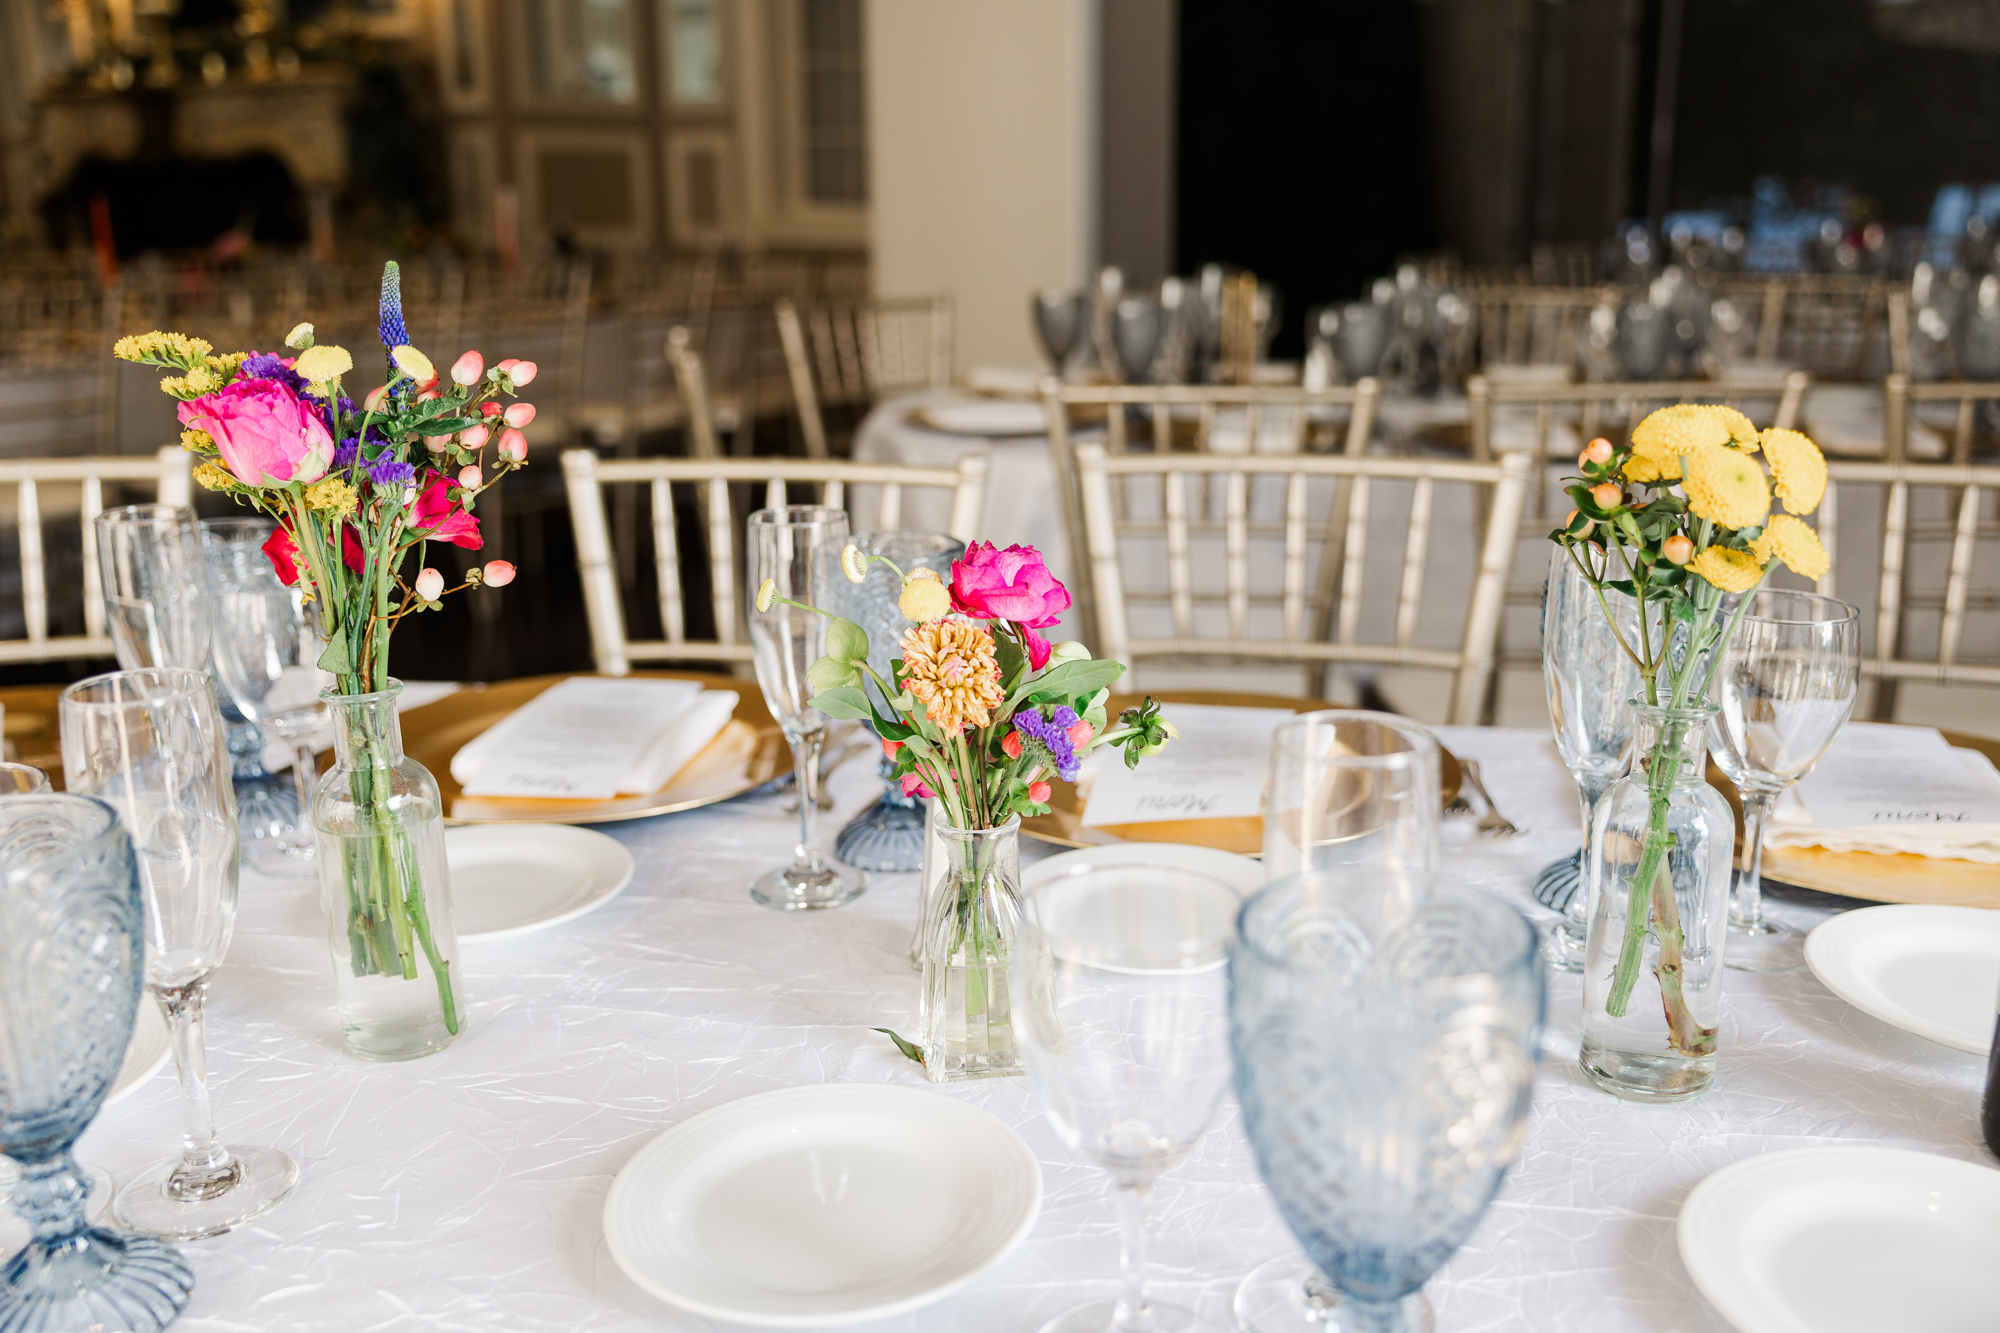 Sweet Wedding at Briarcliff Manor in Summertime